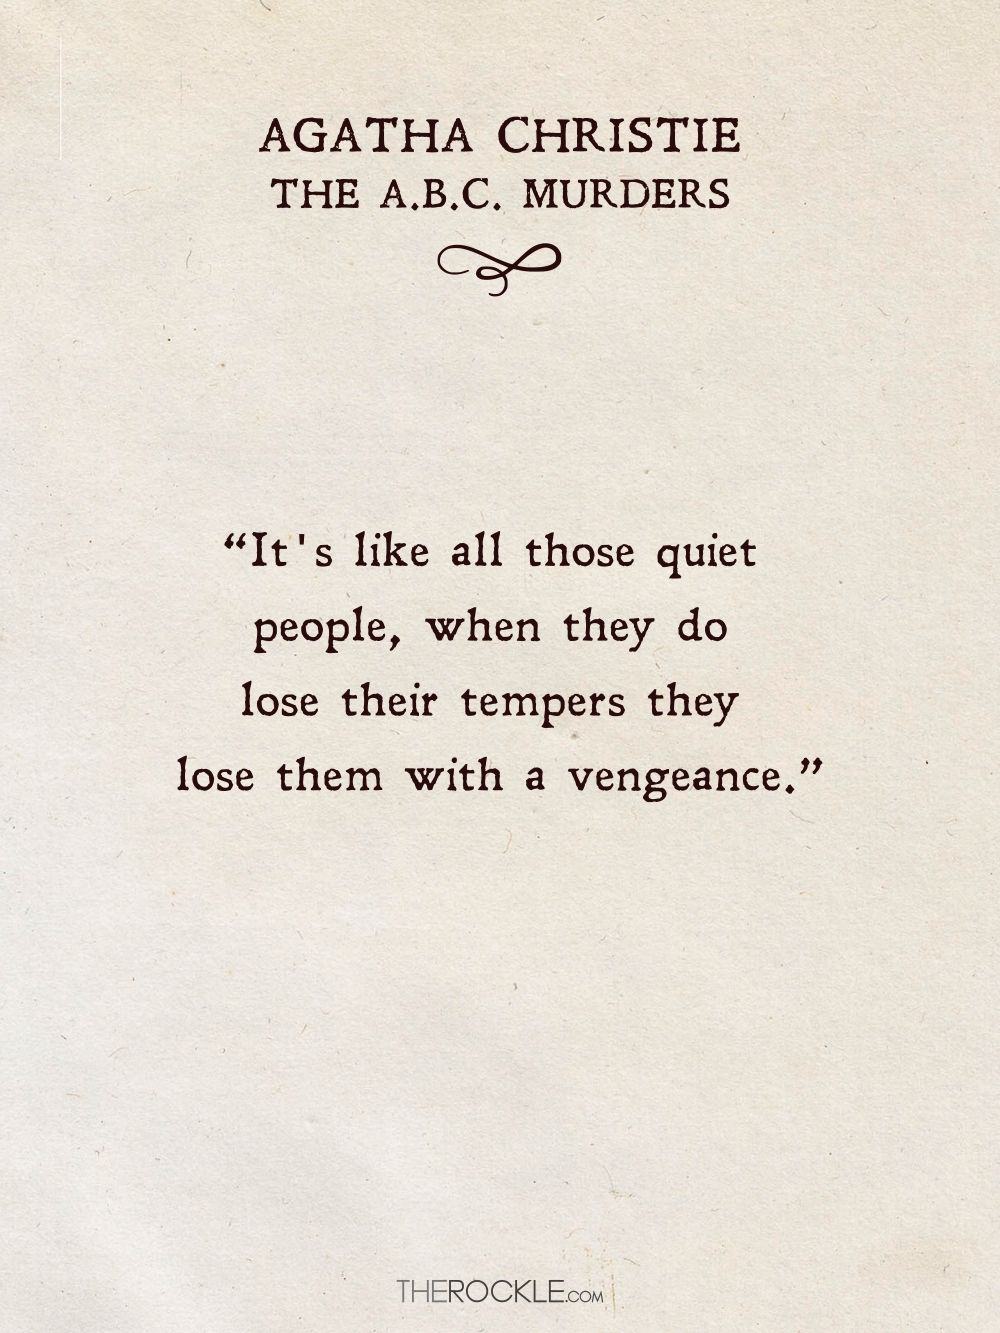 agatha christie quotes on mystery